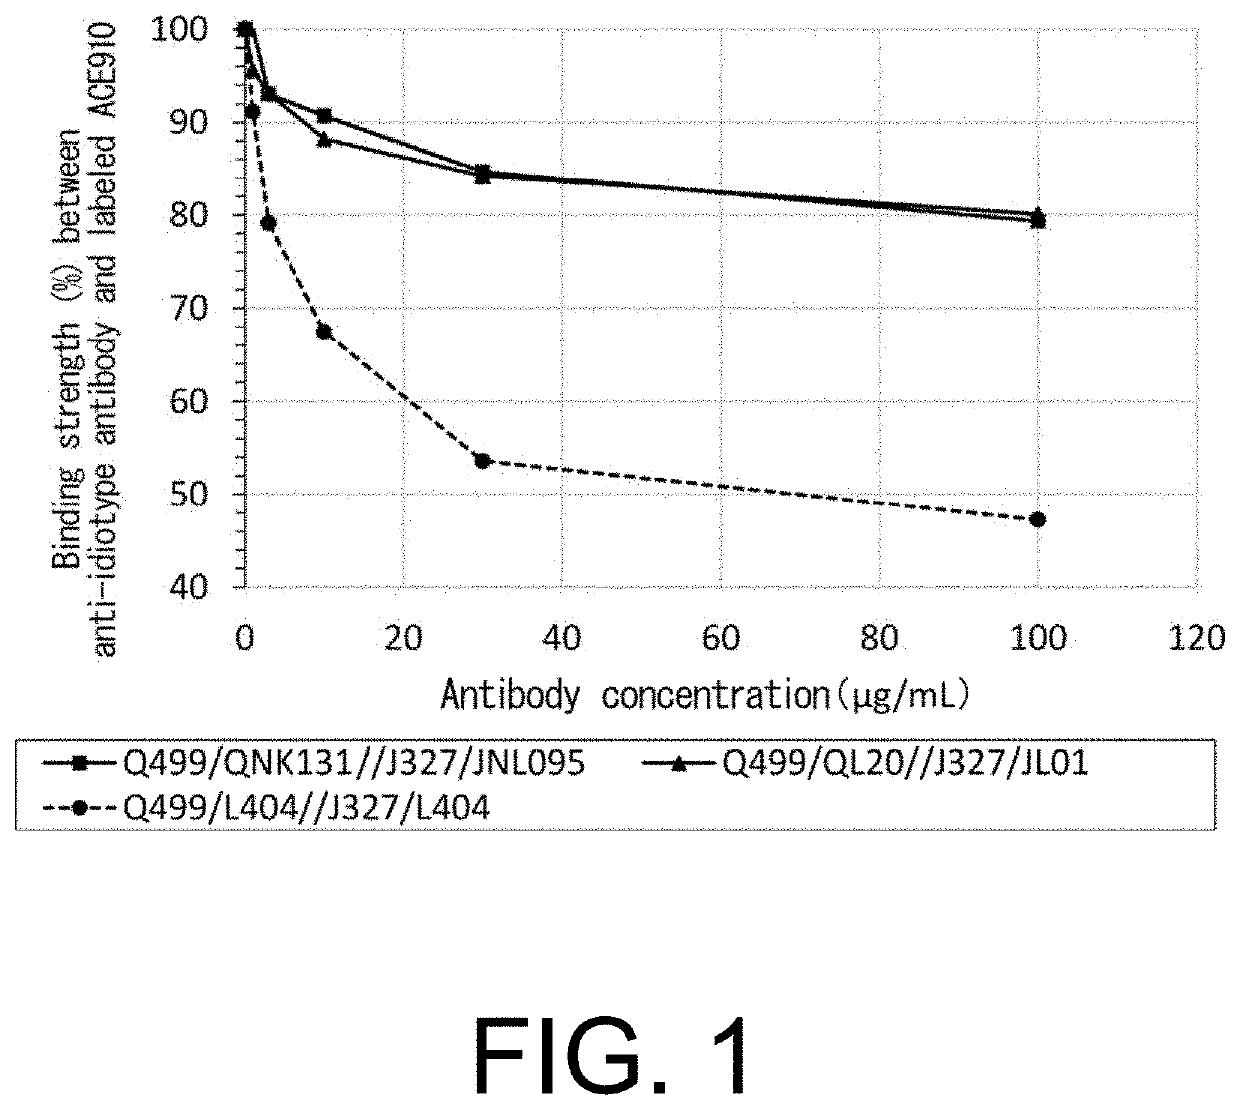 Multispecific antigen-binding molecules having blood coagulation factor VIII (FVIII) cofactor function-substituting activity and pharmaceutical formulations containing such a molecule as an active ingredient